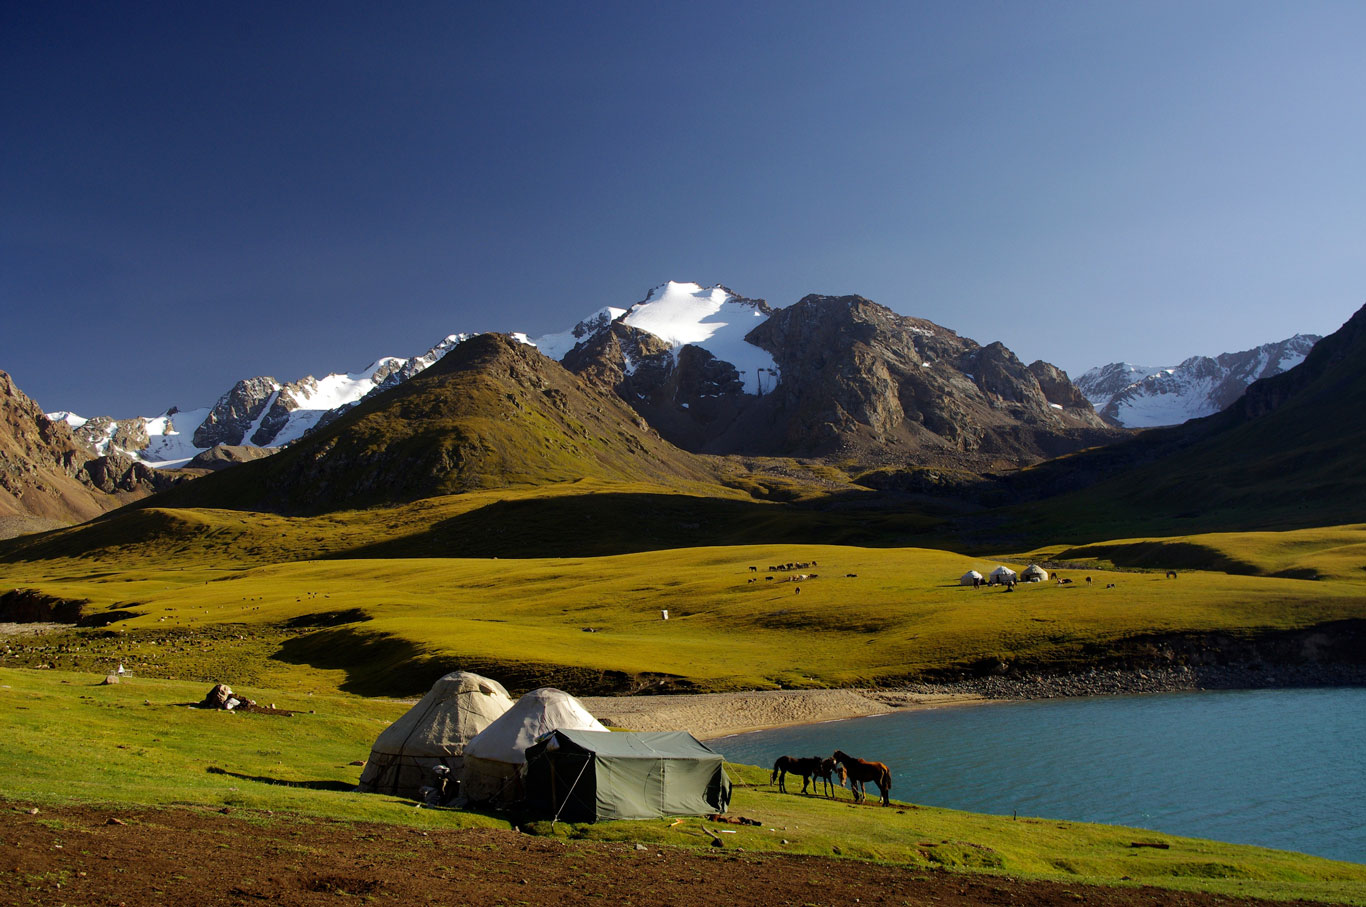 Nomads' place Kyrgyzstan